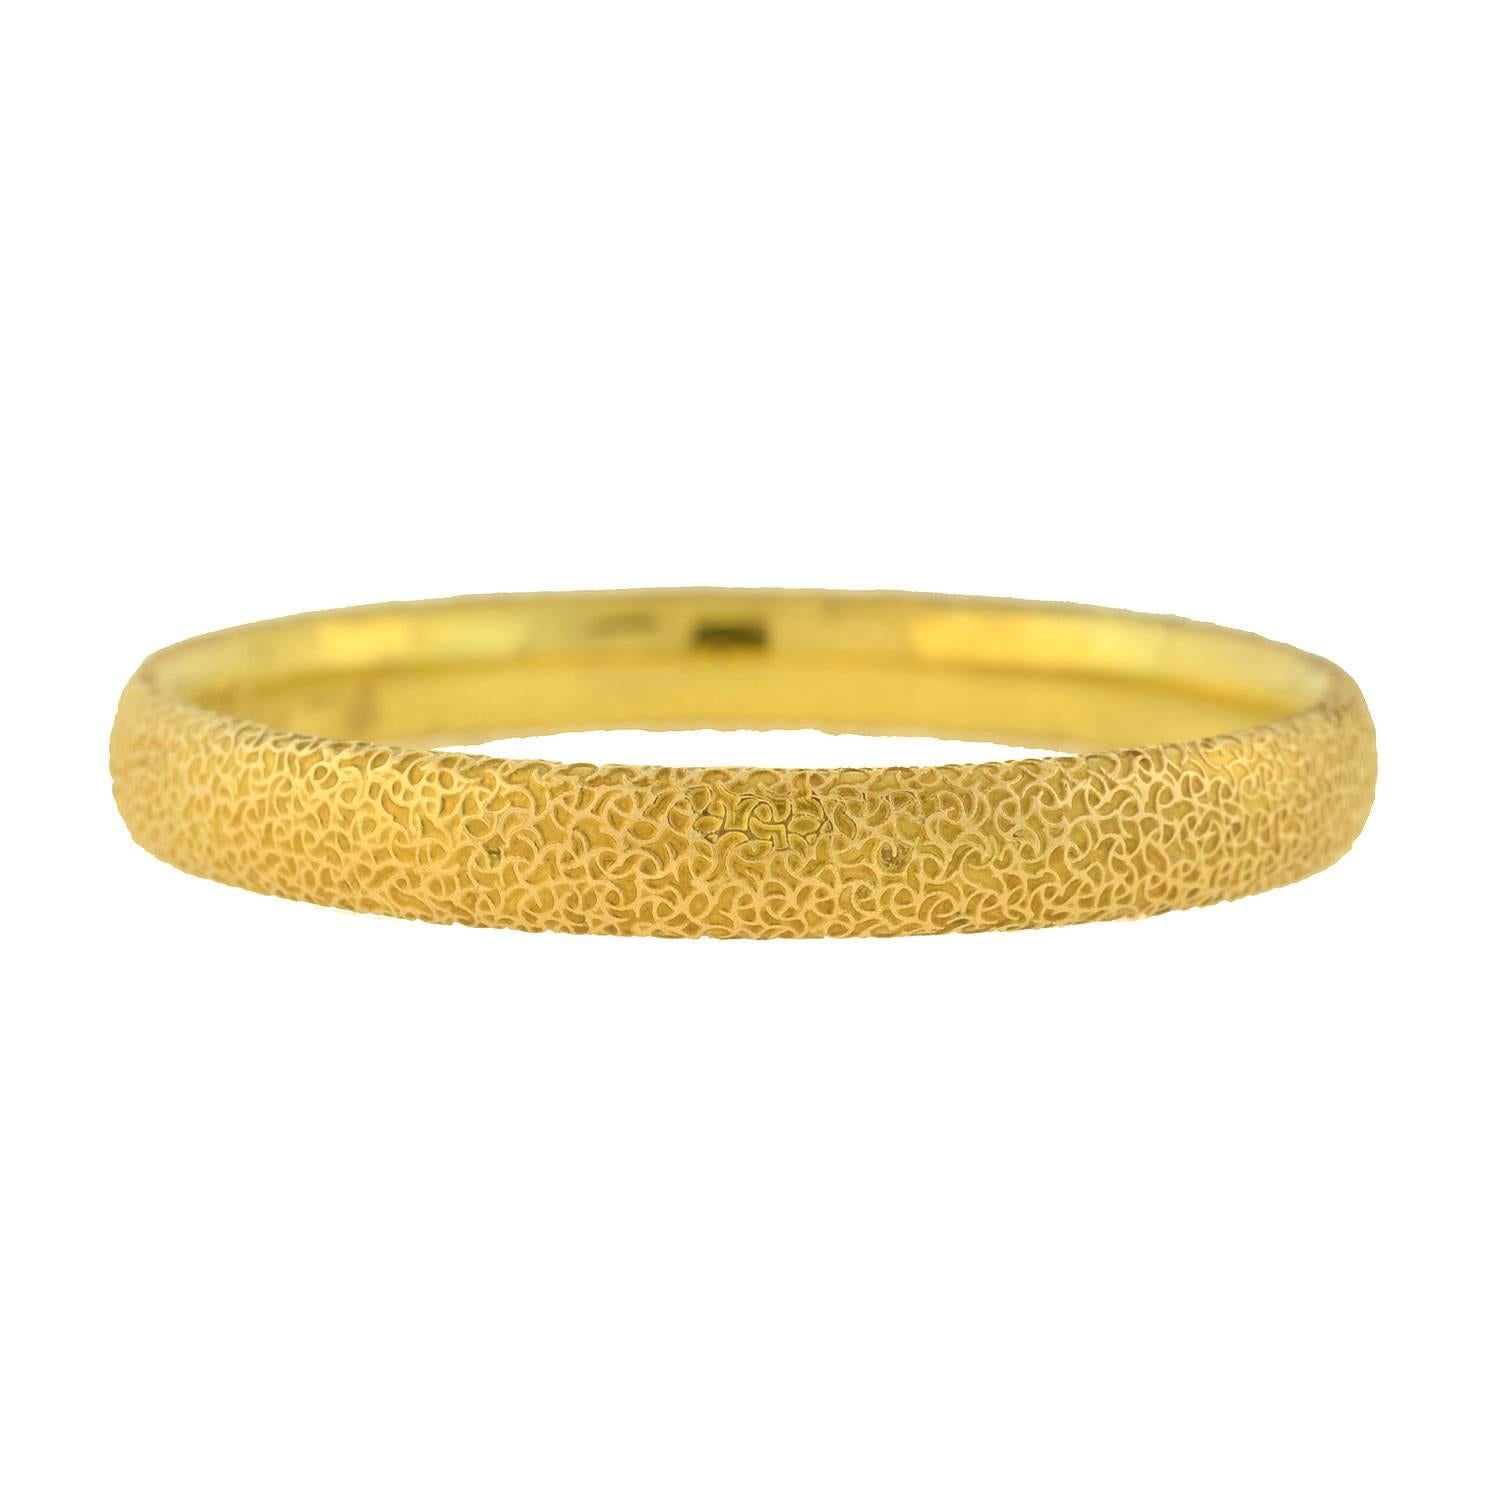 A stunning and unique bangle bracelet from the Art Nouveau (ca1906) era! Crafted in 14kt yellow gold, the entire surface of the piece is decorated with a fine applied wirework pattern. The design creates an intricate texture that reflects the light